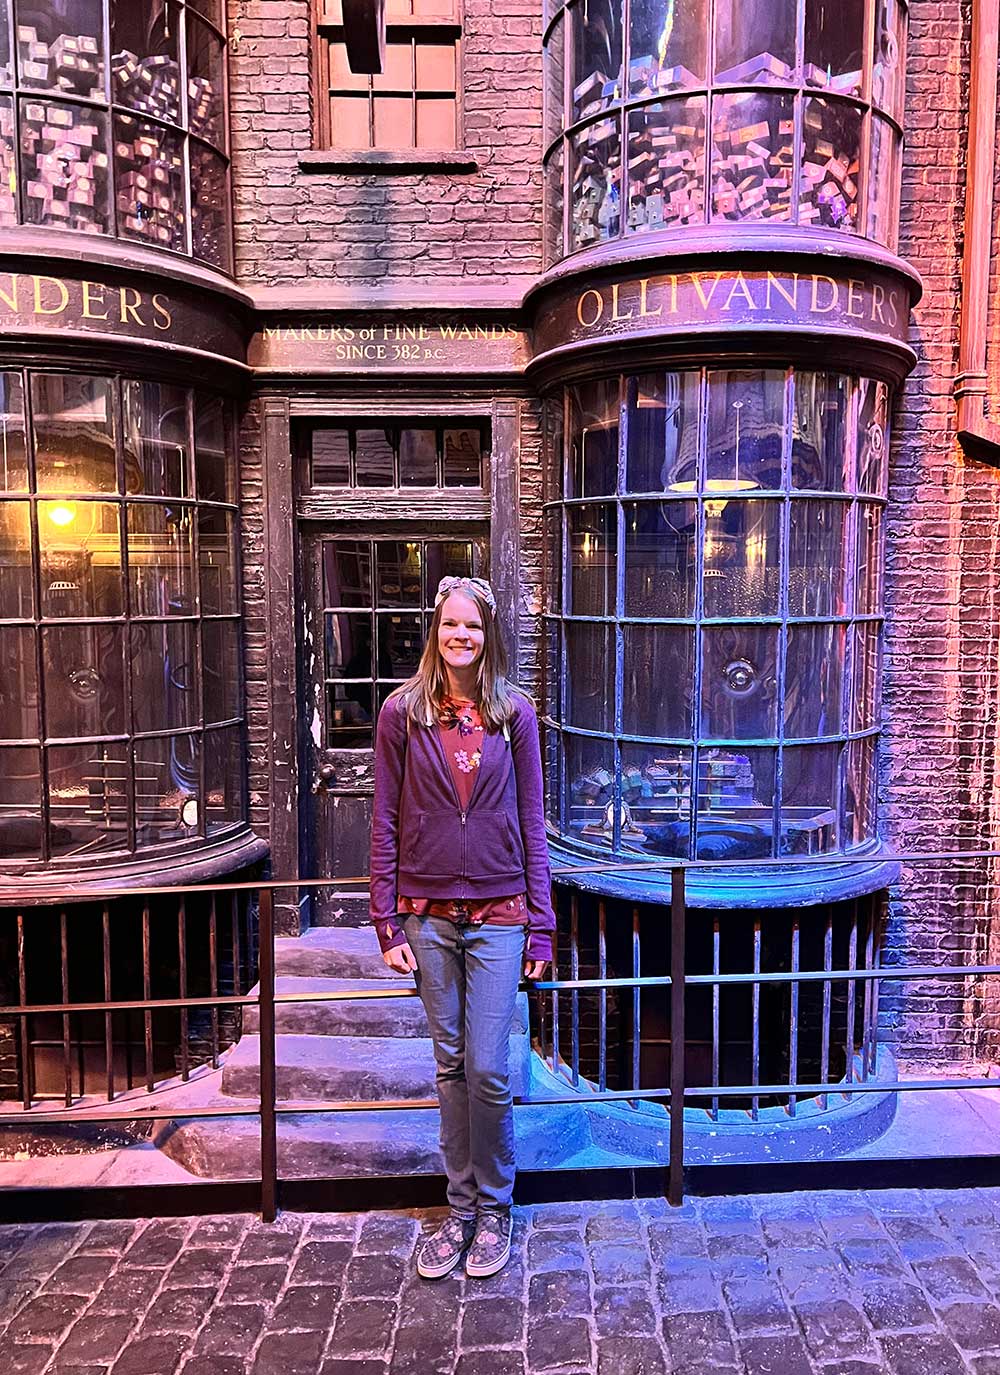 Diagon Alley and Ollivander's Wand Shop